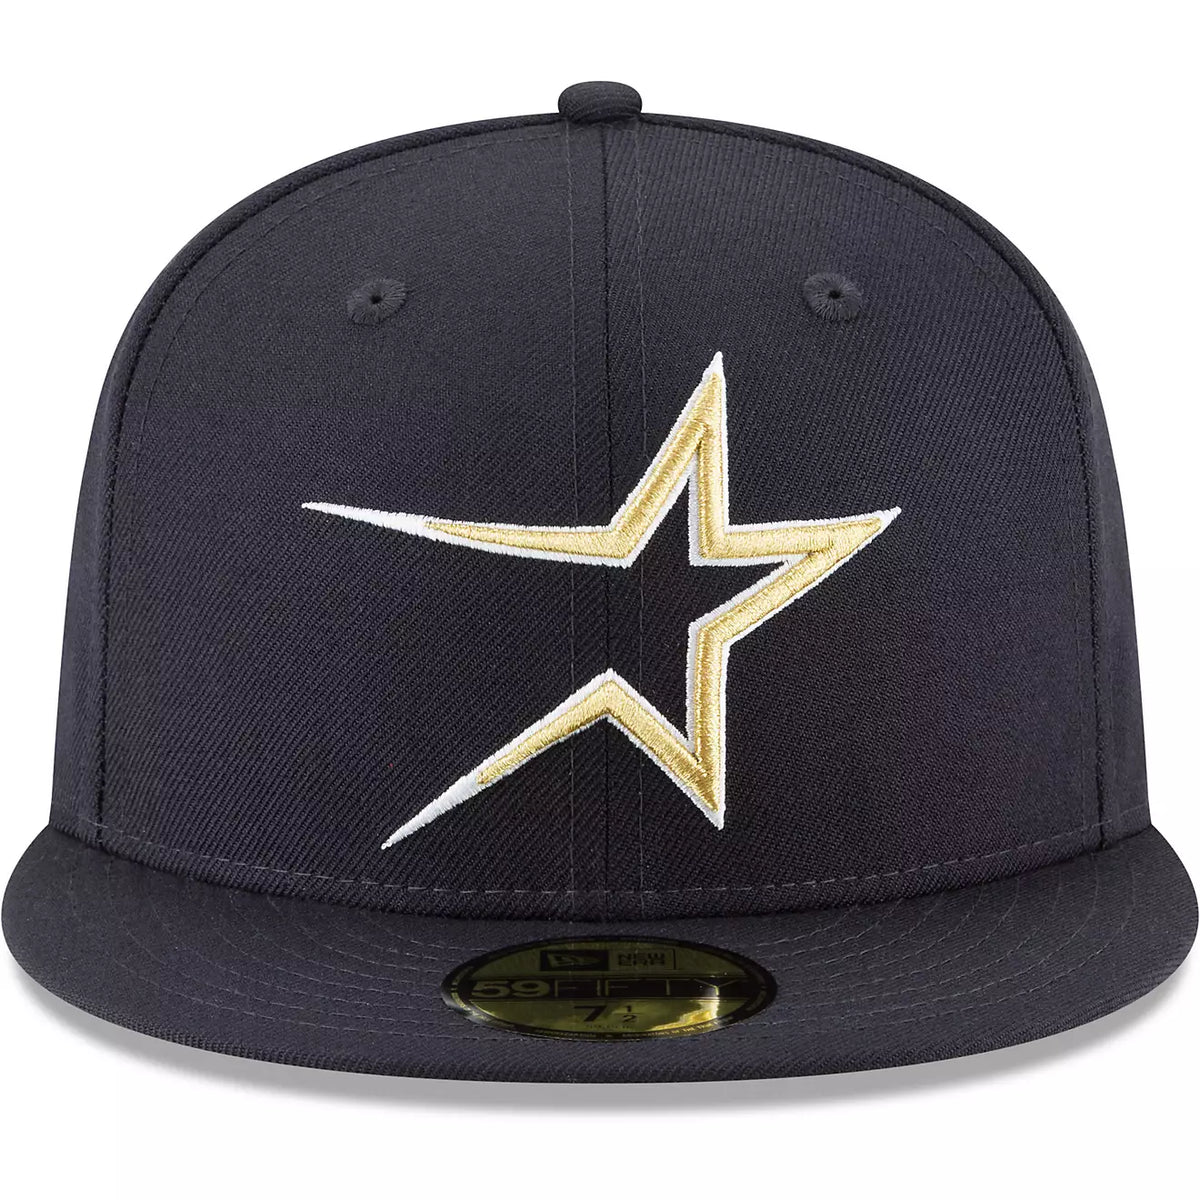 New Era Houston Astros Fitted Hat- NAVY BLUE/ GOLD